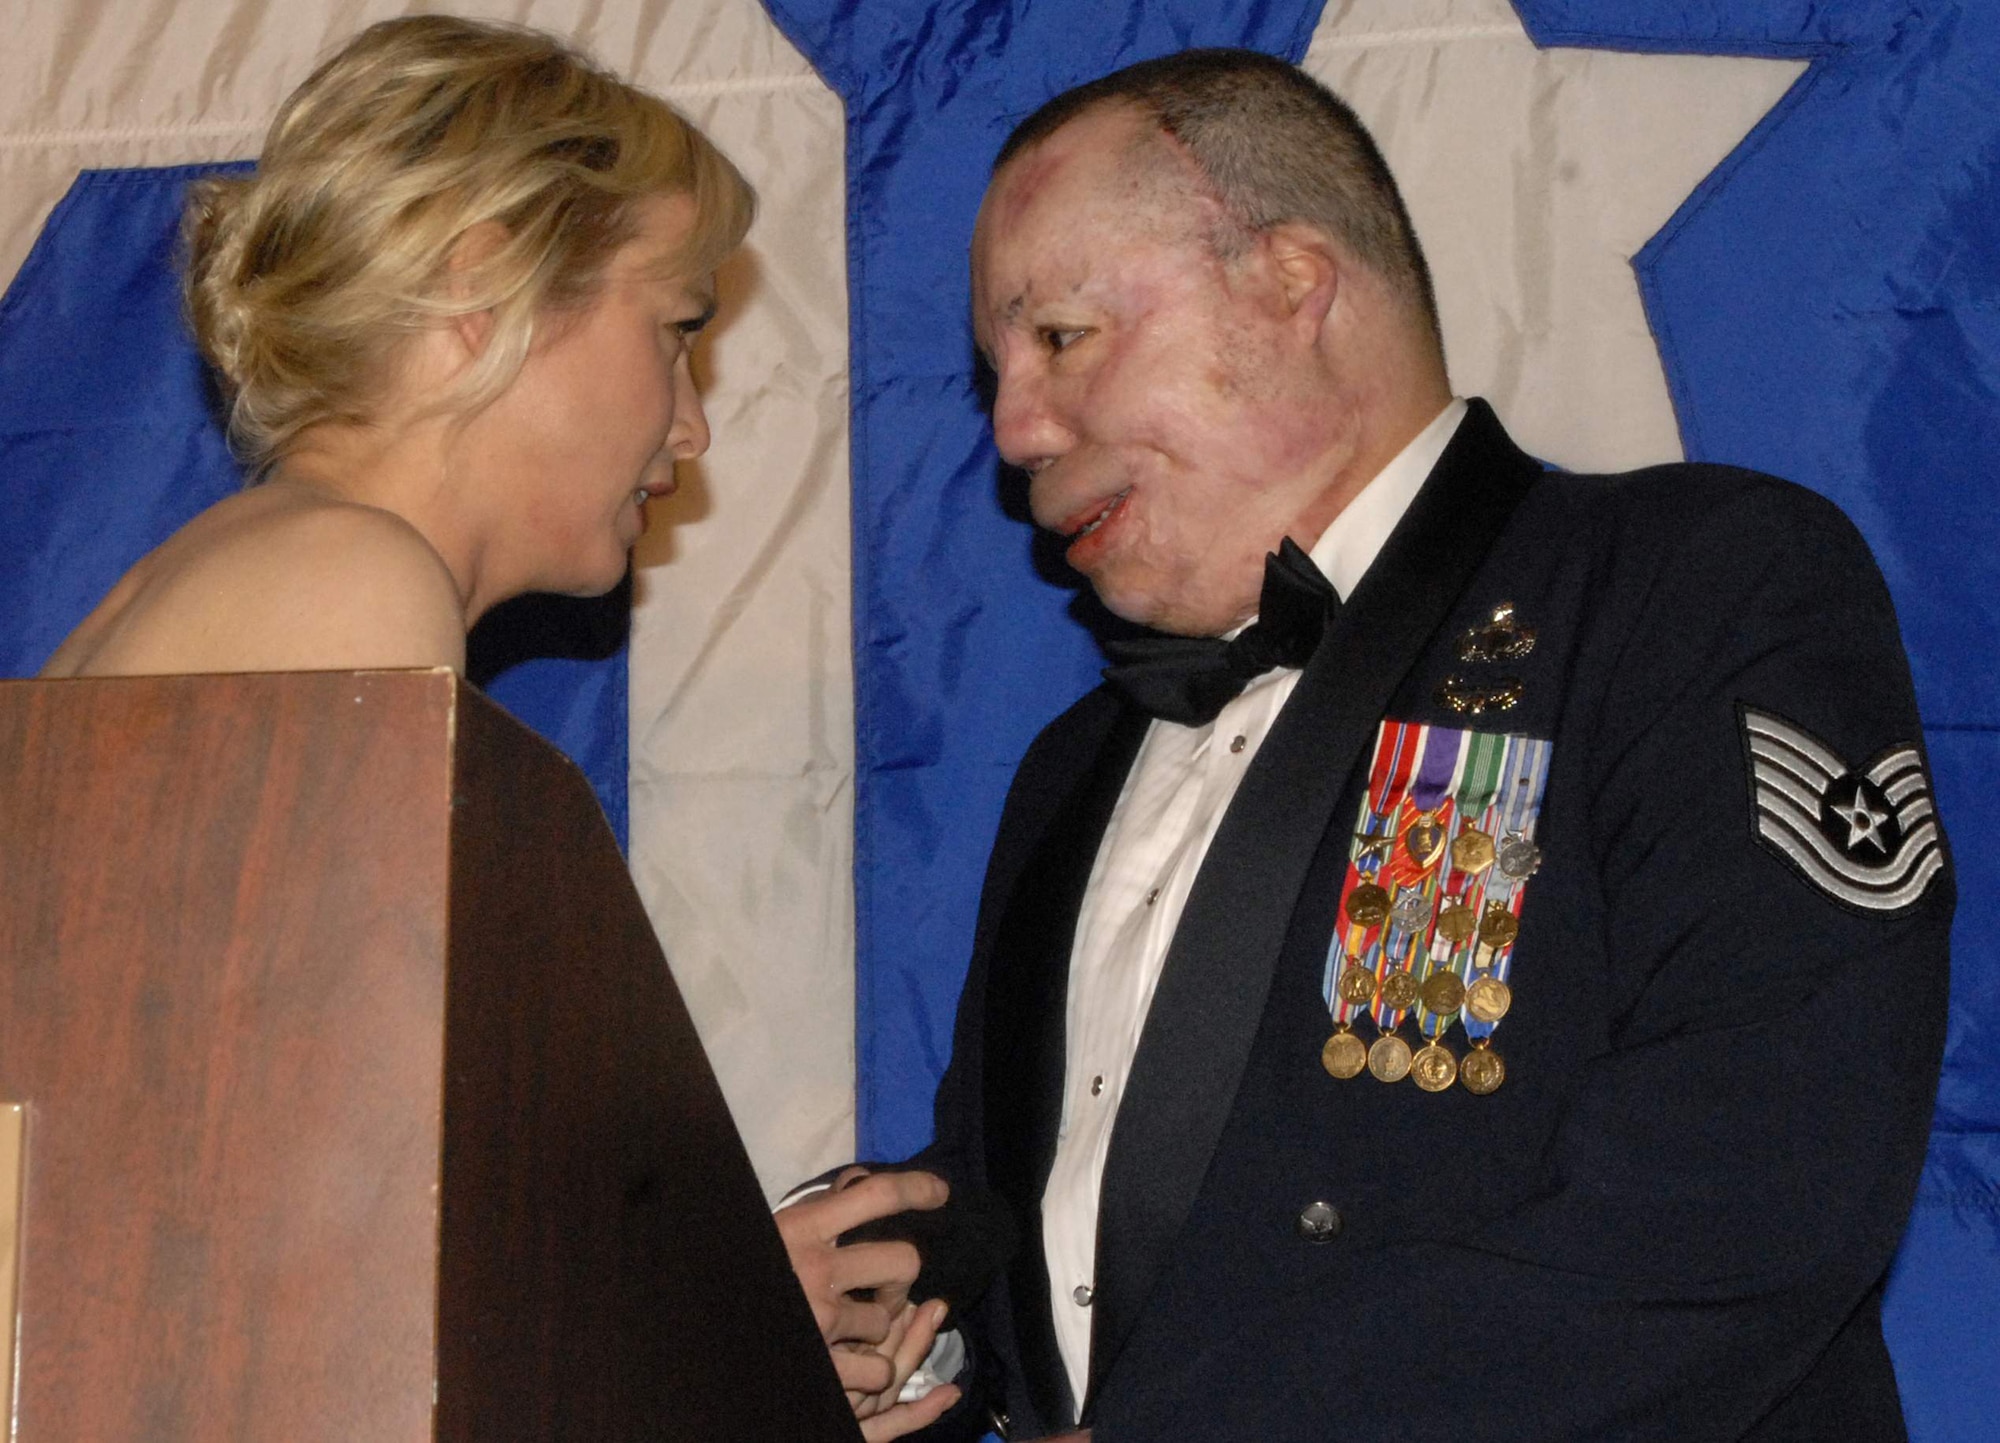 Actress and United Services Organization volunteer Renee Zellweger greets Tech. Sgt. Israel Del Toro during the USO of Metropolitan Washington Annual Awards dinner at the Ritz Carlton March 25 in Washington, D.C. The event recognized 31 of the nation's 98 living Medal of Honor recipients and other battlefield heroes from each branch of service. (U.S. Air Force photo/Tech. Sgt. Amaani Lyle) 
